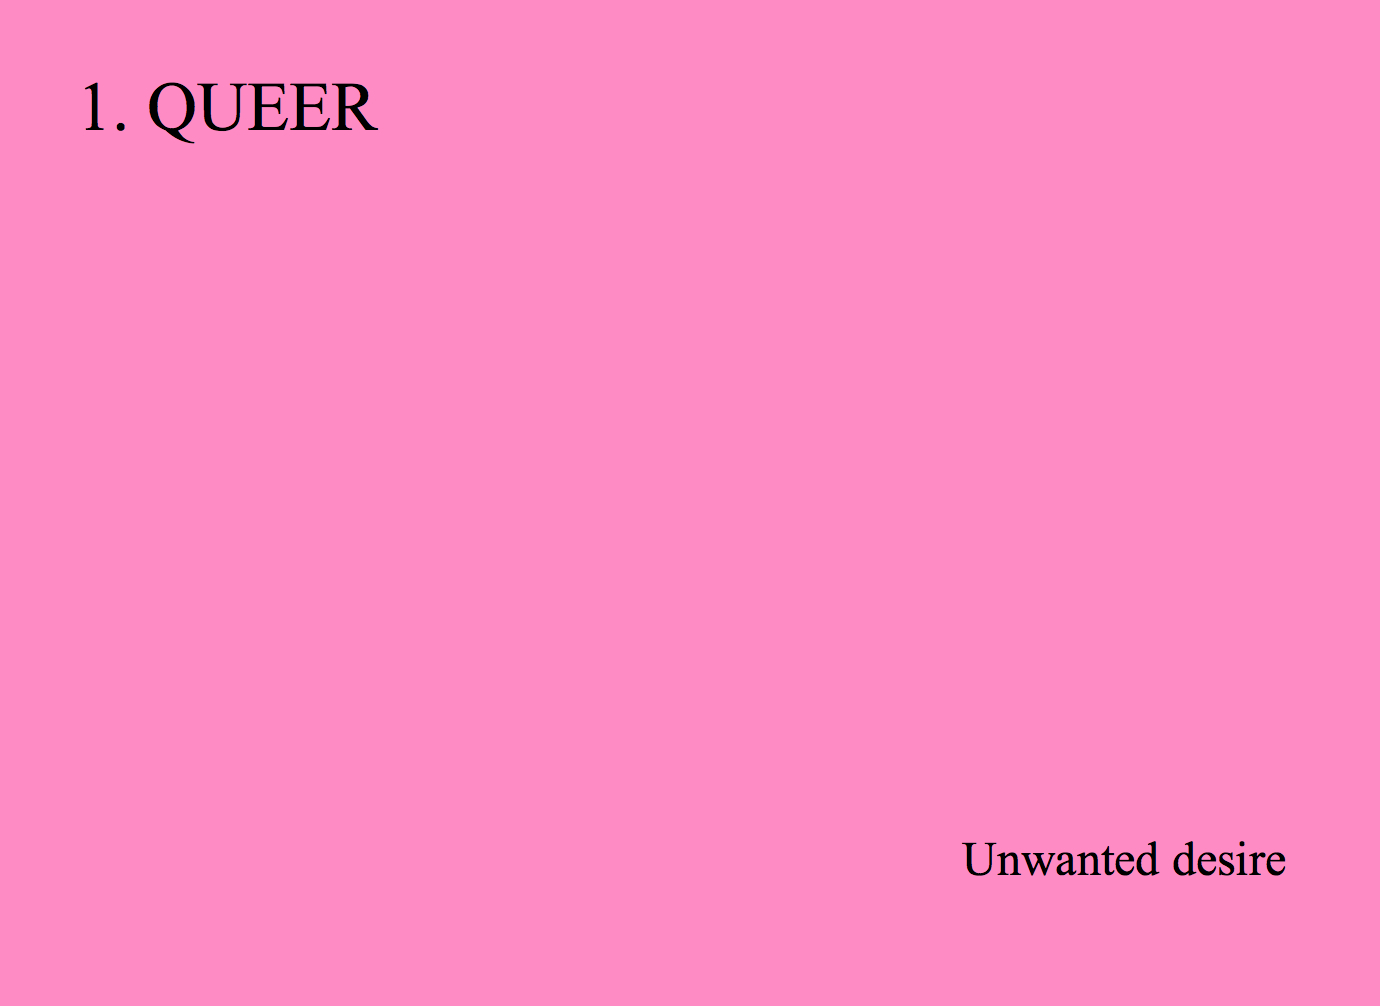 Lecture_1queer